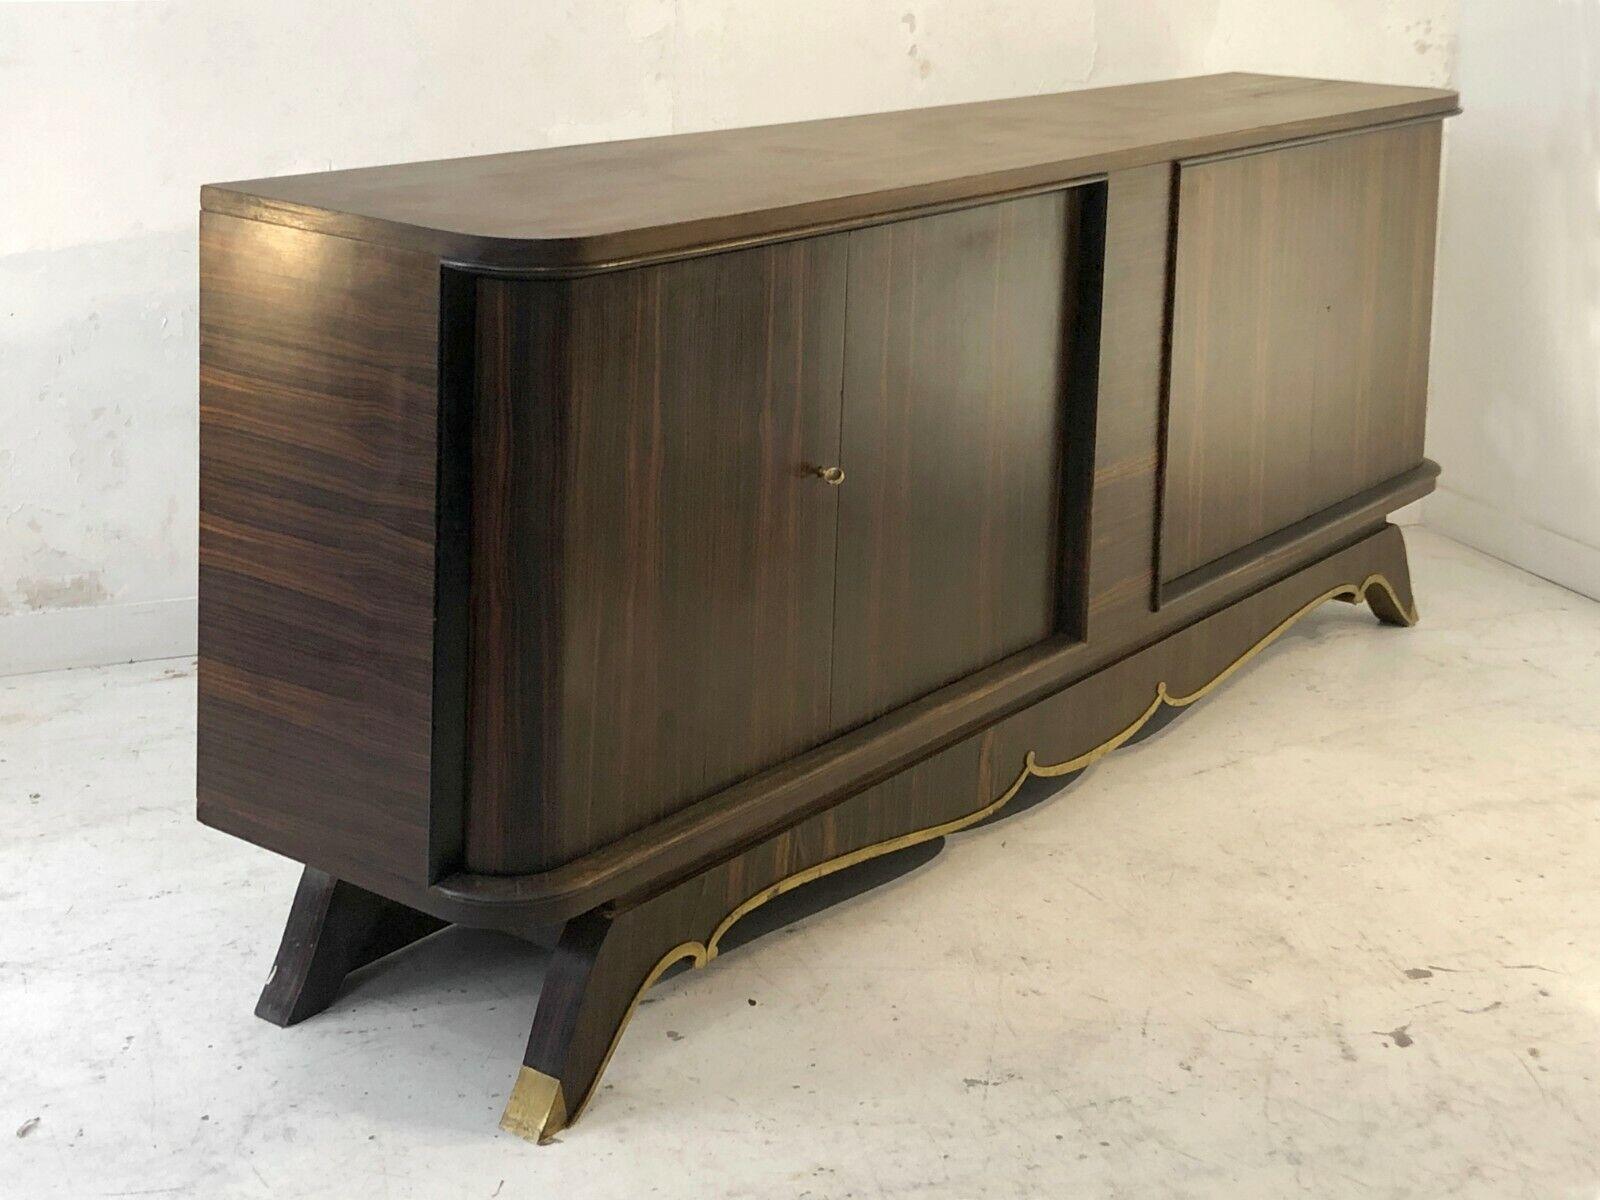 A sumptuous Art Déco sideboard, neoclassical, made in solid oak plated in Macassar ebony veneer on the outside, of Sycamore inside the doors, finished with elegant bronze elements, attributed to Jules Leleu, France 1930-1940.

This beautiful